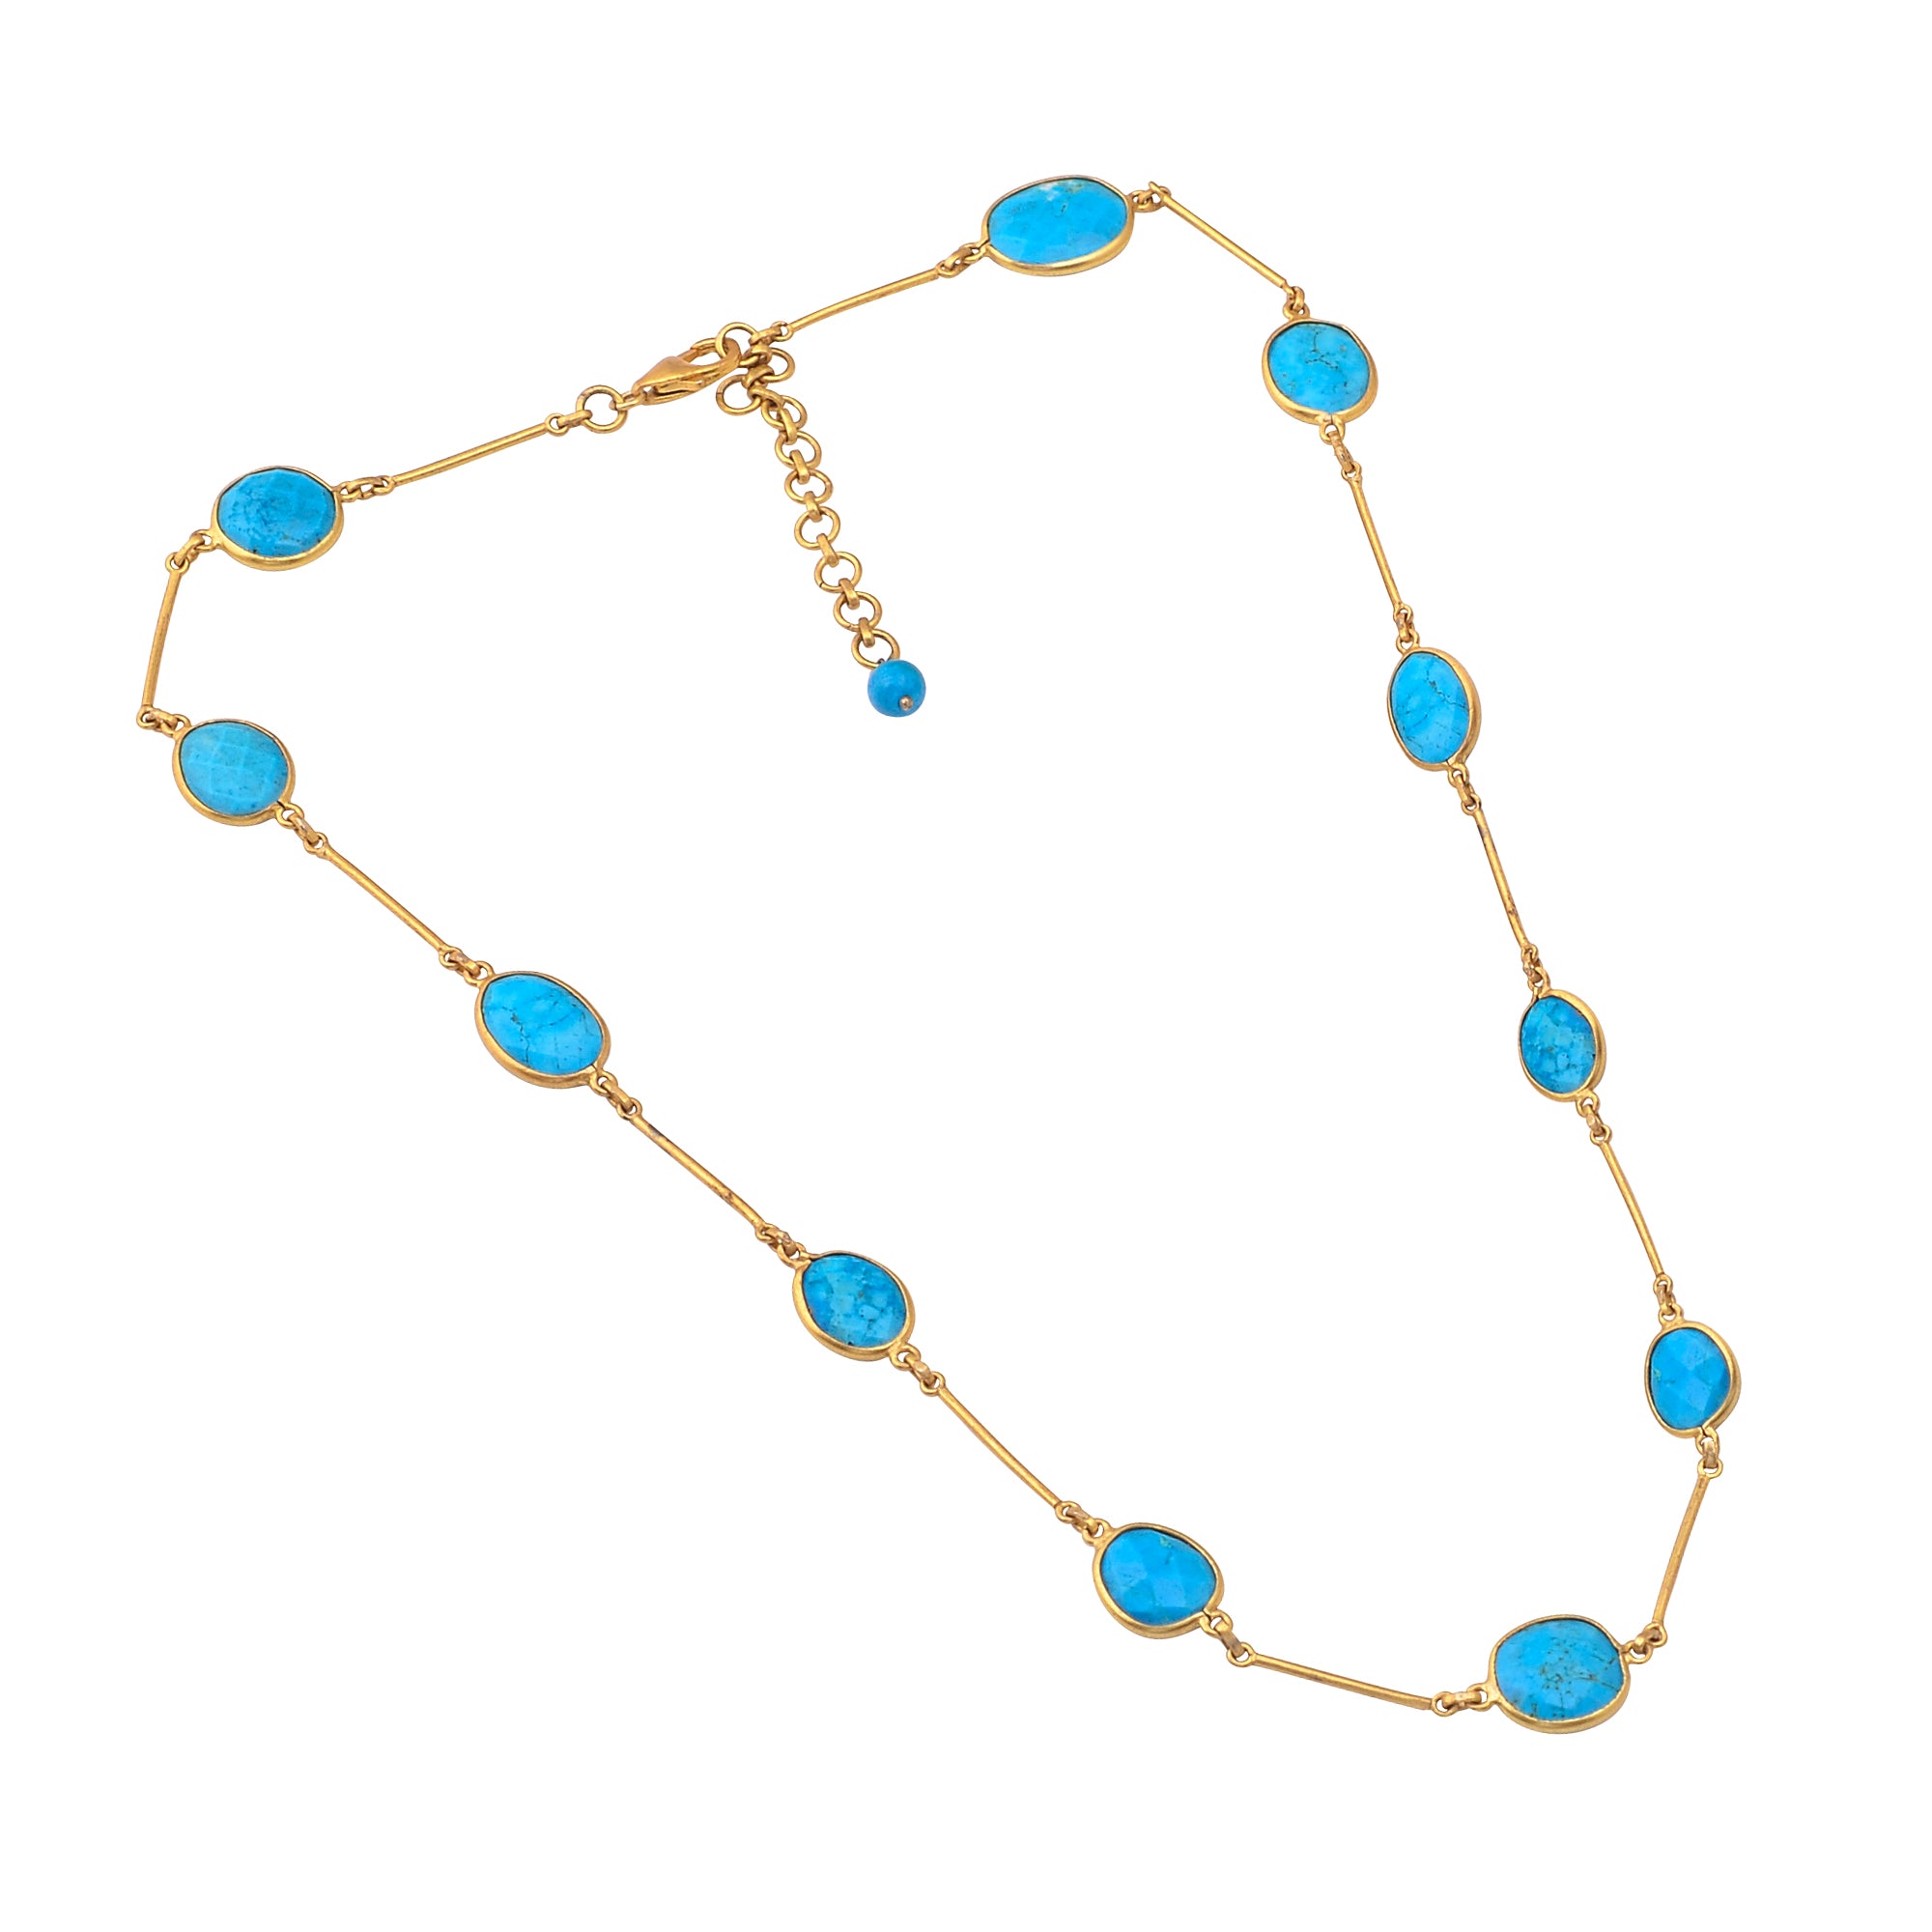 Buy Handcrafted Silver Gold Plated Turquoise Collet Pipe Necklace